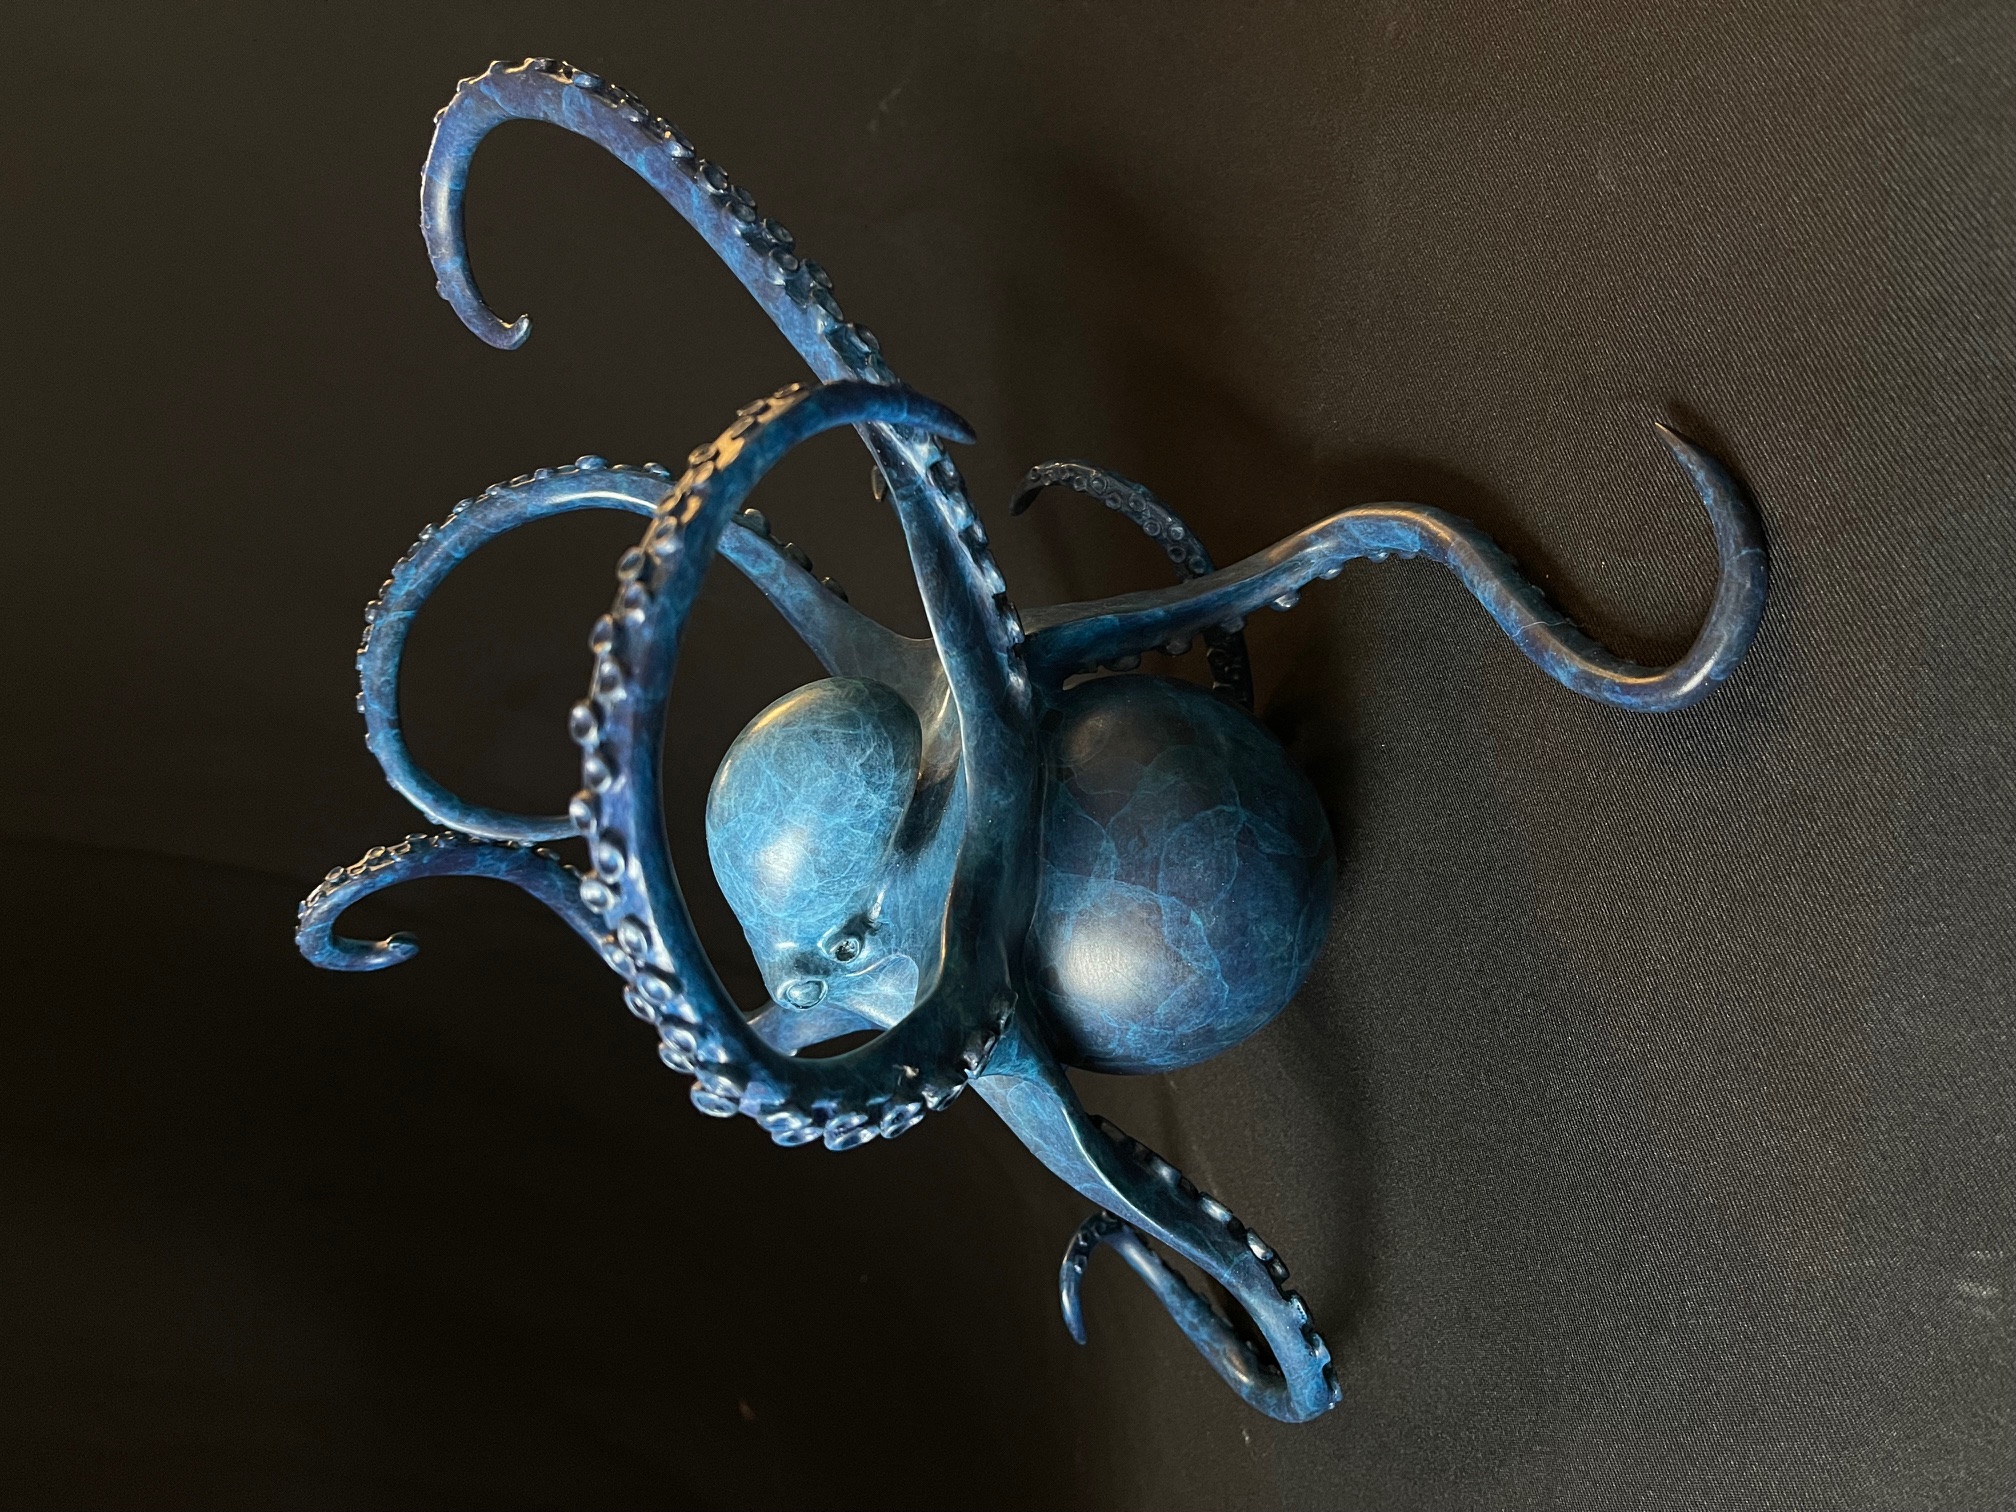 Image of Octopus on Ball by Stephen Rew